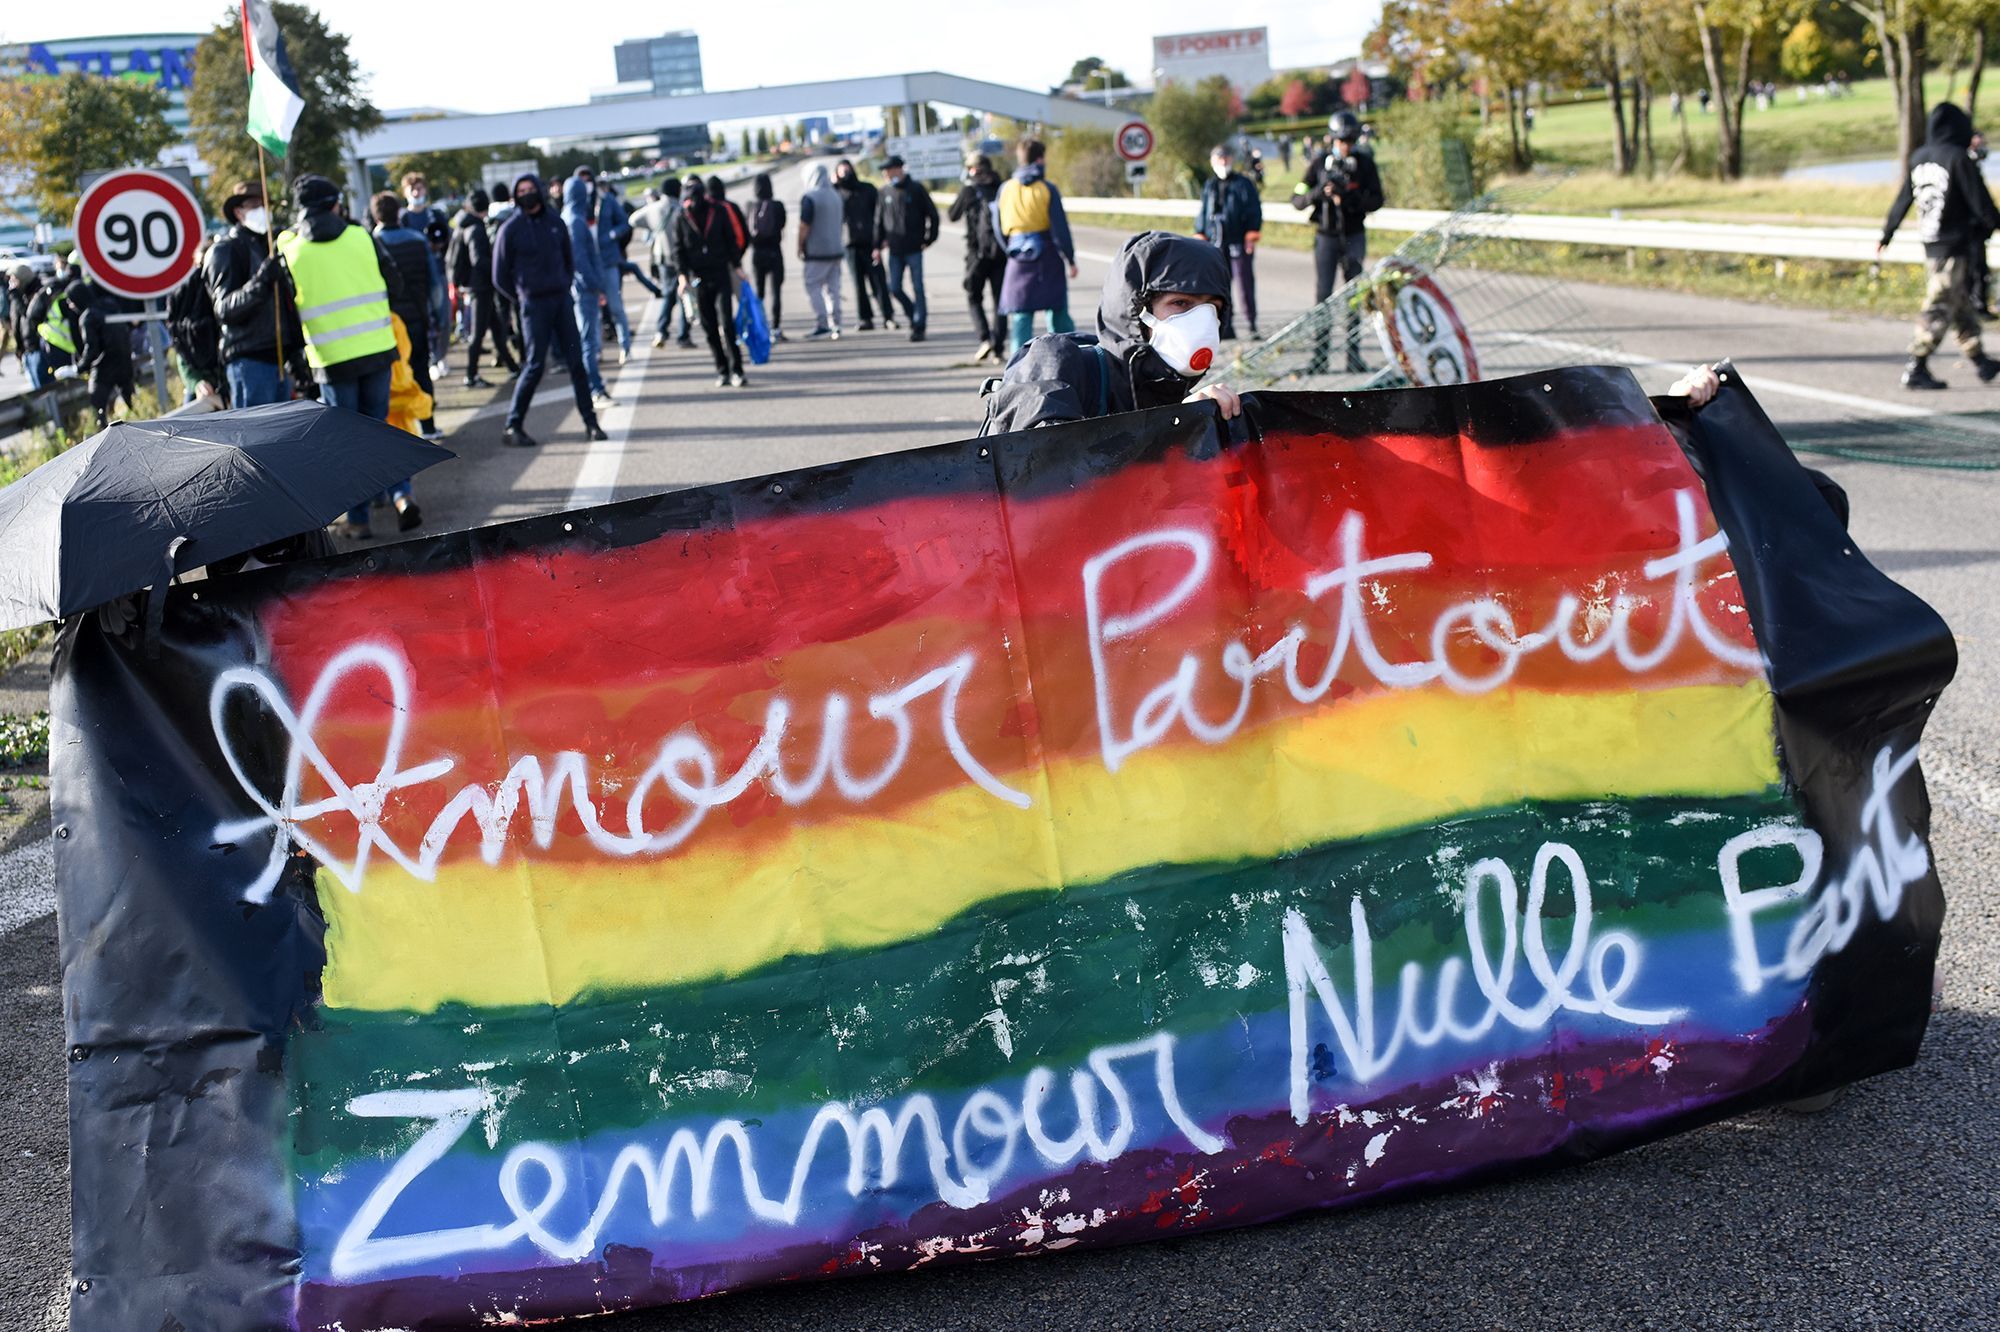 A protester hides behind a banner reading 'love everywhere, Zemmour nowhere' in Saint-Herblain, near Nantes, western France, on October 30, 2021, during a rally against the visit of the French far-right media pundit Eric Zemmour. - The French far-right media pundit Eric Zemmour visits Nantes' Zenith Metropole indoor arena on October 30, 2021 as part of his promotional tour for his book "France hasn't said its last word". (Photo by Sebastien SALOM-GOMIS / AFP)